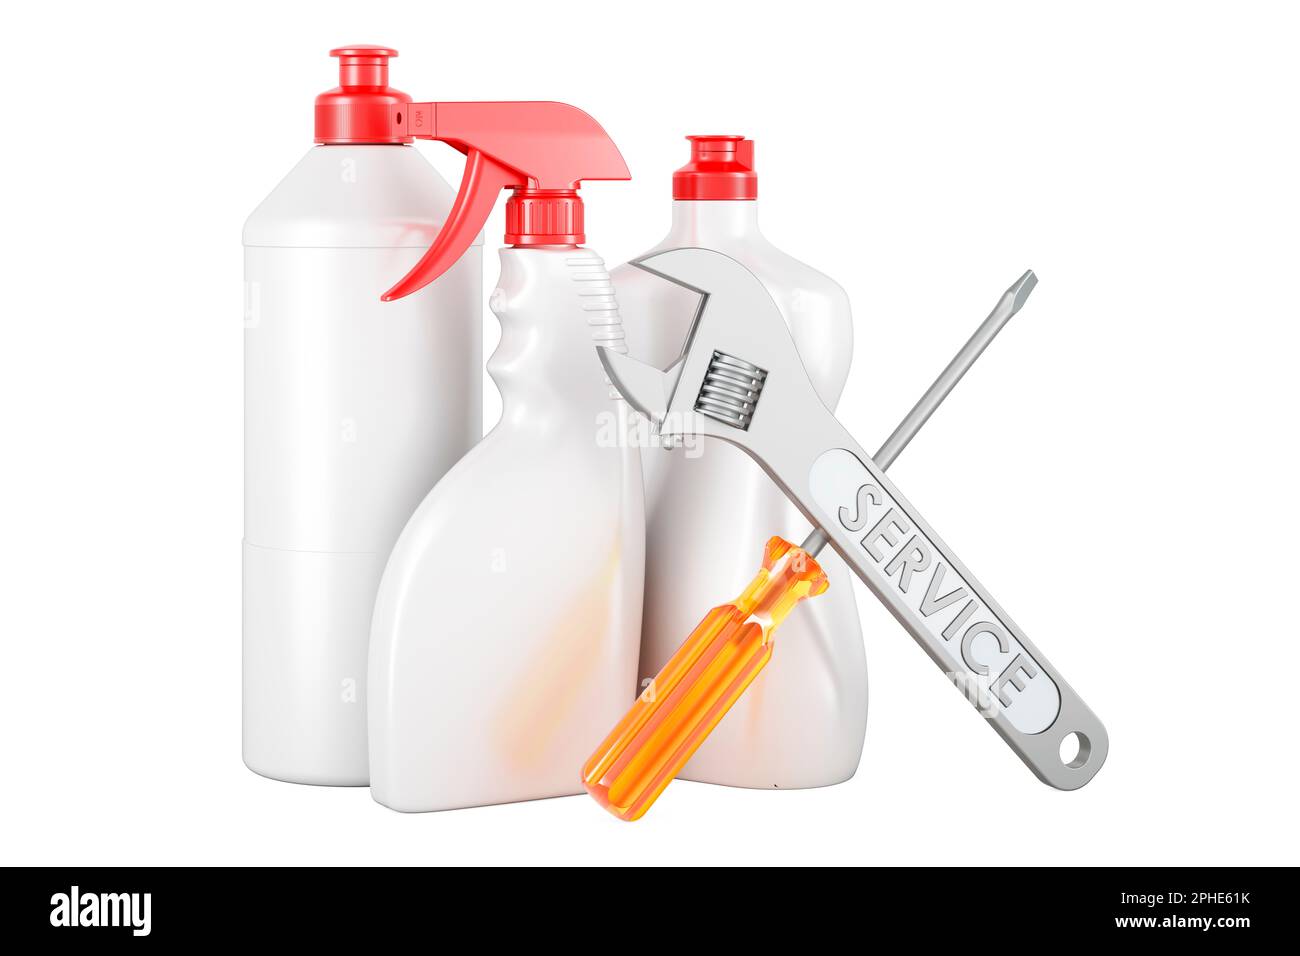 Detergent, cleaning products with screwdriver and wrench, 3D rendering isolated on white background Stock Photo